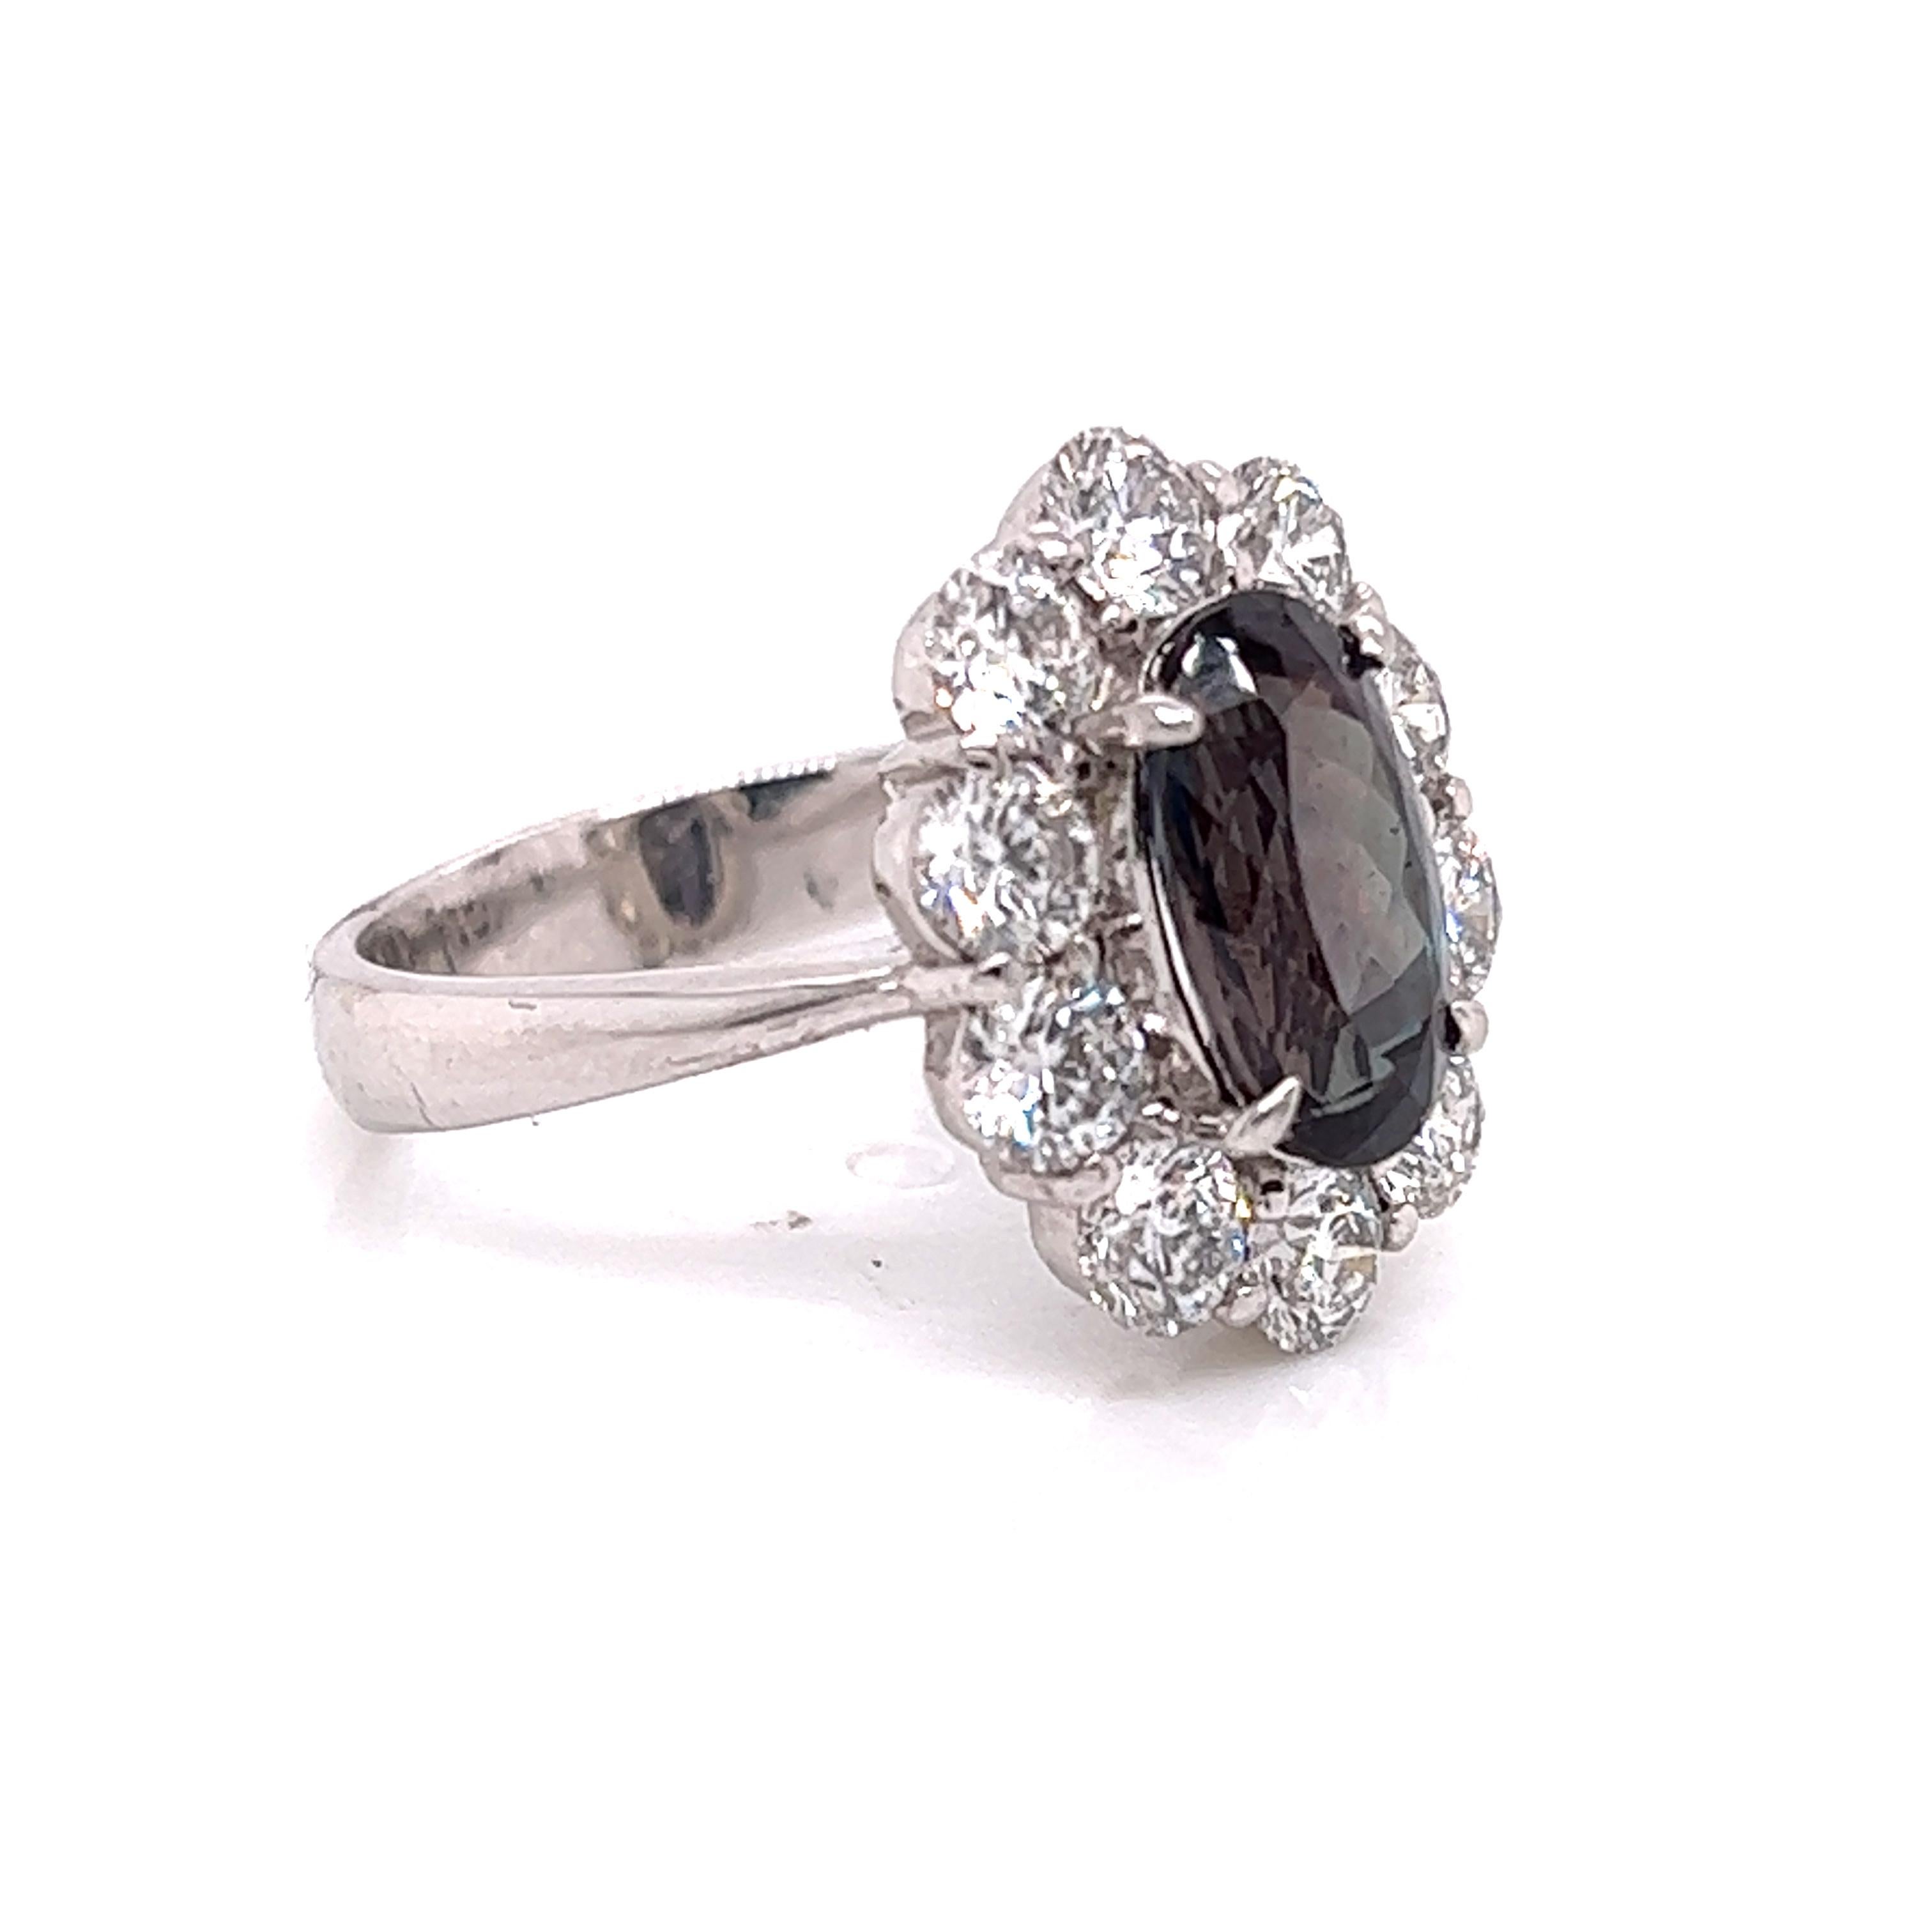 This is a gorgeous natural AAA quality oval Alexandrite surrounded by dainty diamonds that is set in a vintage platinum setting. This ring features a natural 2.82 carat oval alexandrite that is certified by the Gemological Institute of America (GIA)